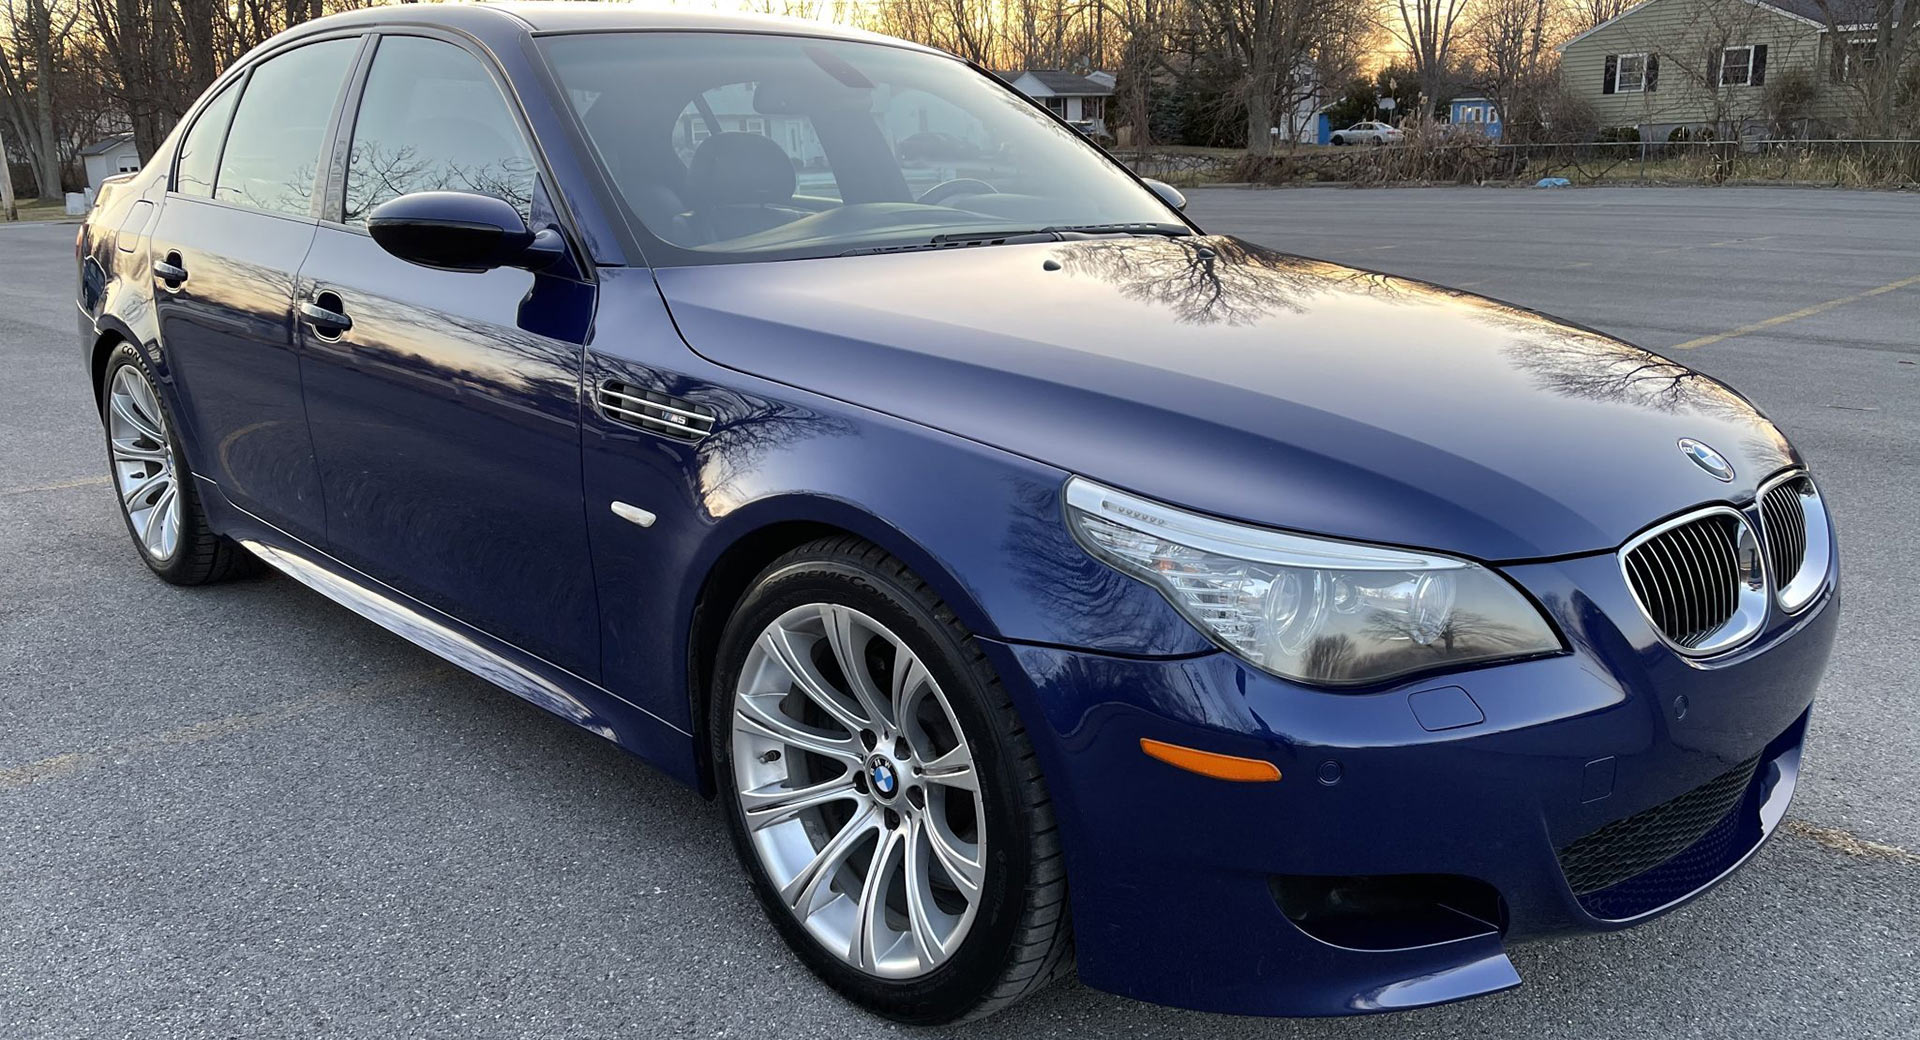 Low-Mileage 2008 BMW M5 Has An Intoxicating Naturally Aspirated V10 |  Carscoops